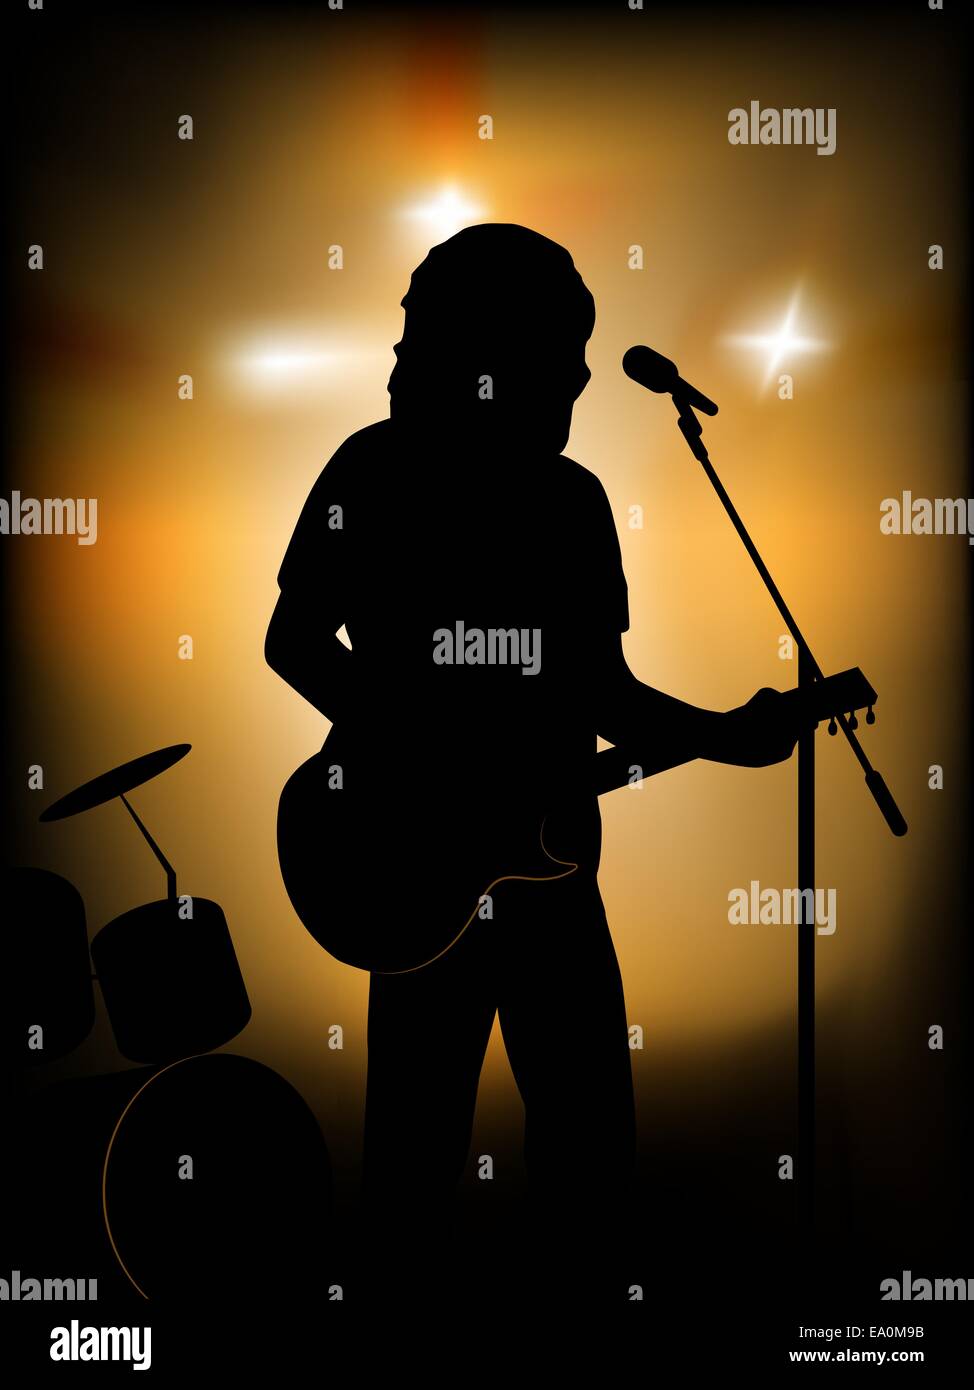 vector silhouette of the guitar player on the stage Stock Vector